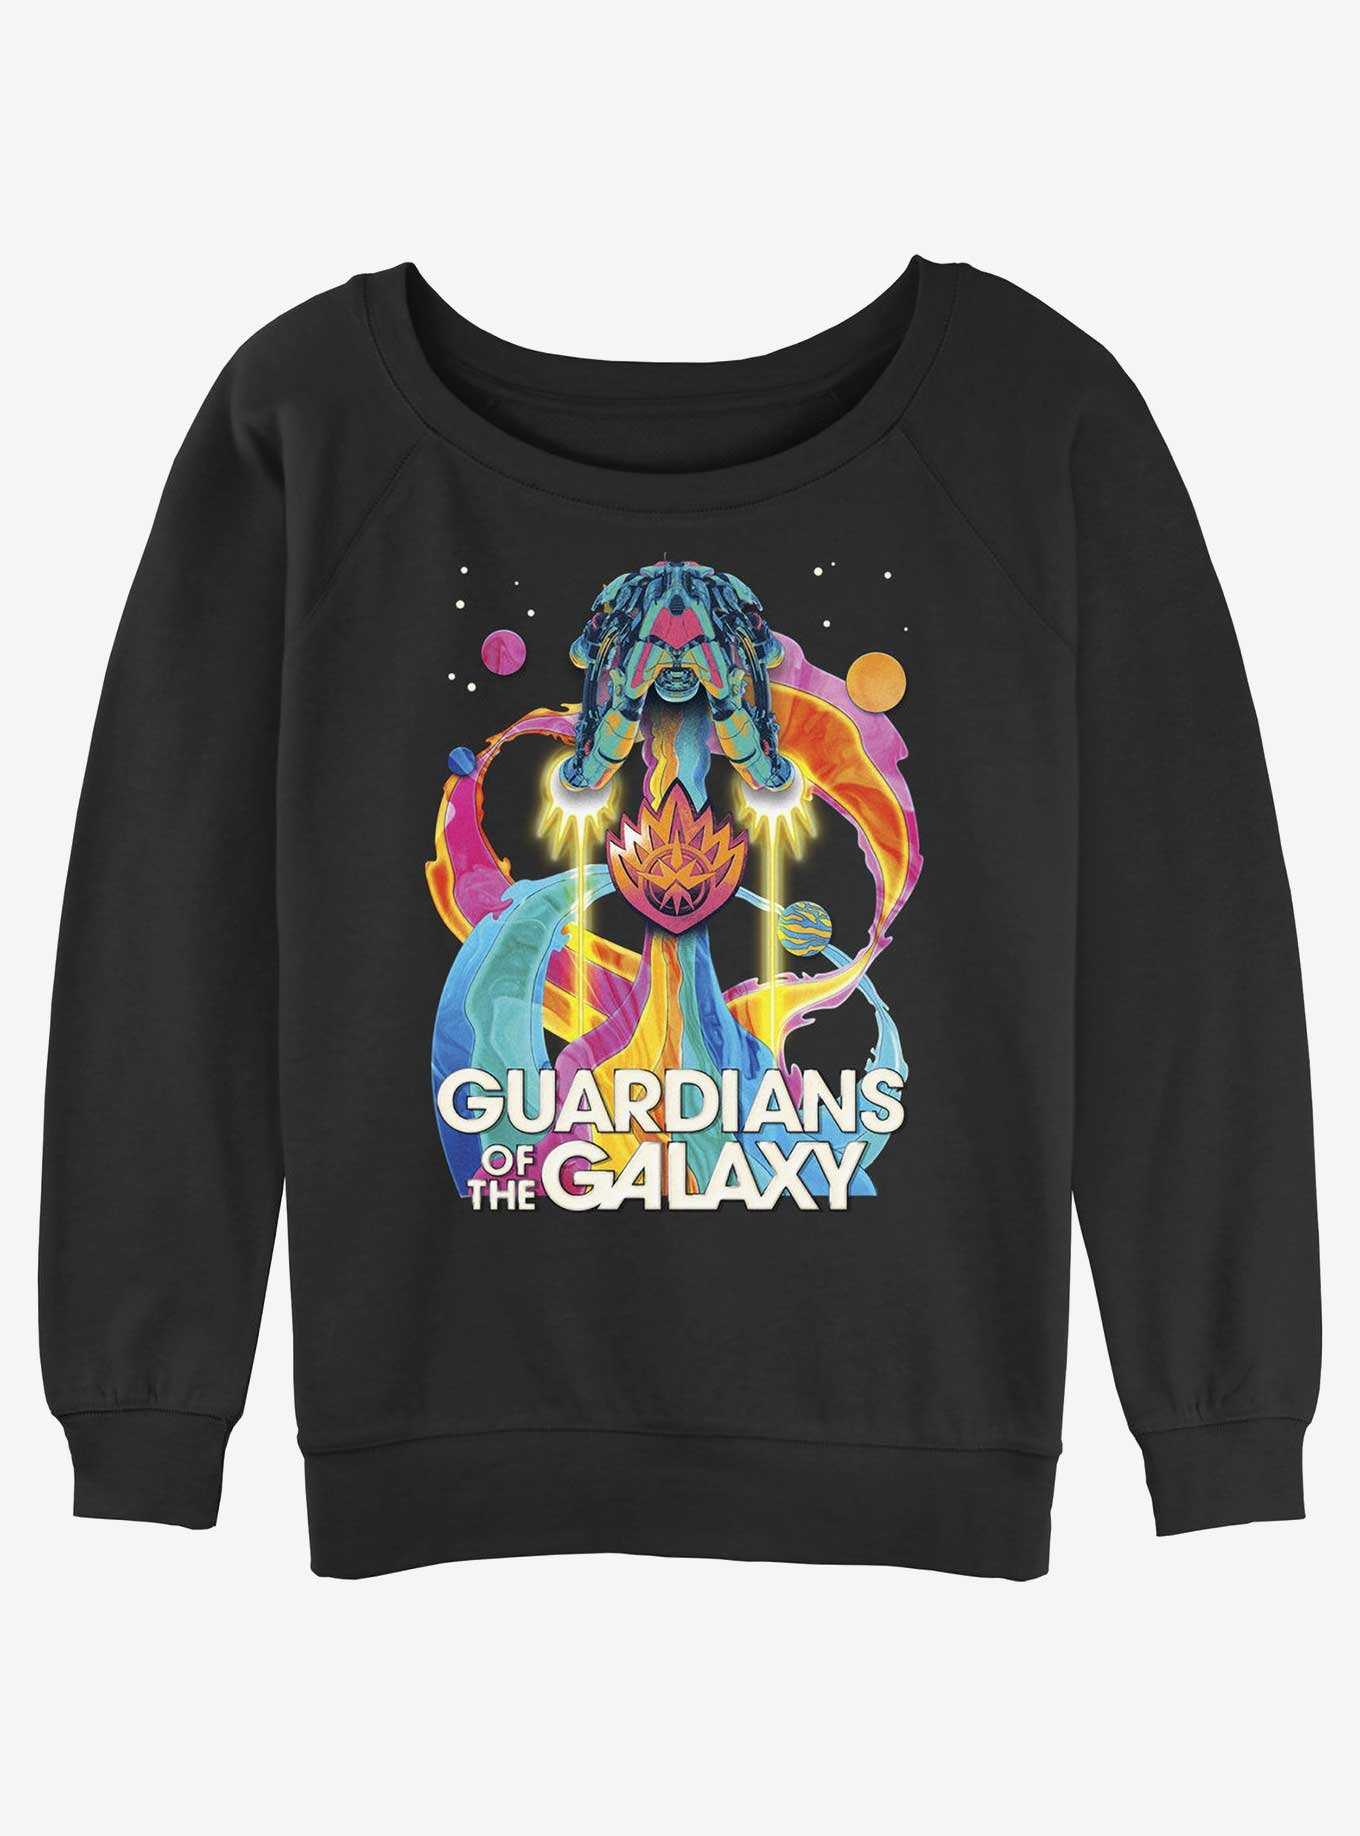 Marvel Guardians Of The Galaxy Psychedelic Ship Girls Slouchy Sweatshirt, , hi-res